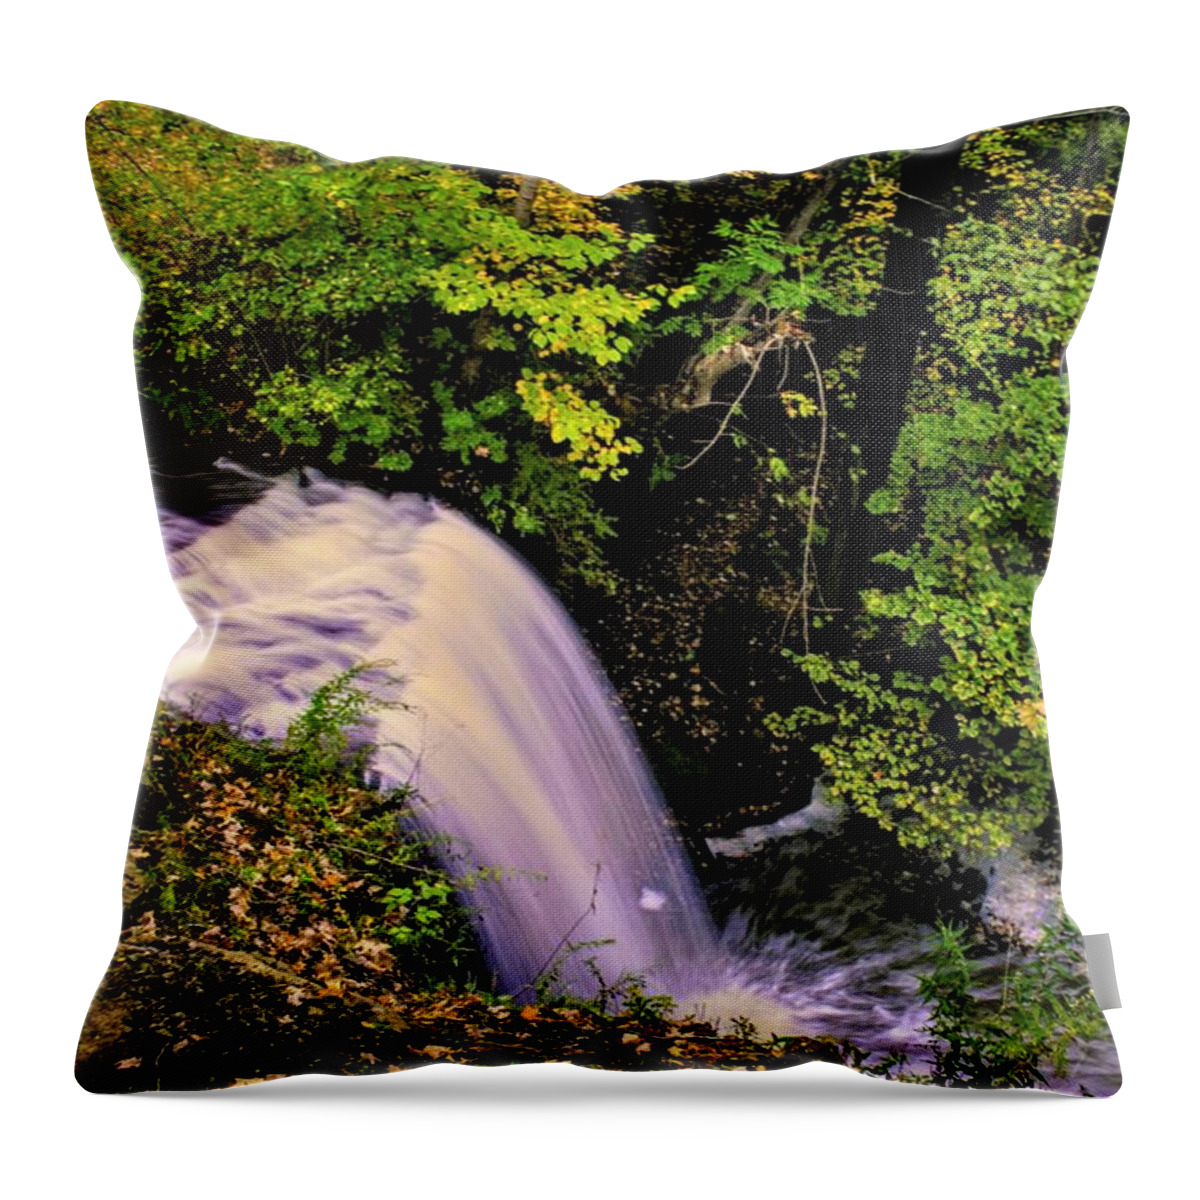  Throw Pillow featuring the photograph Crown Hill by Brad Nellis